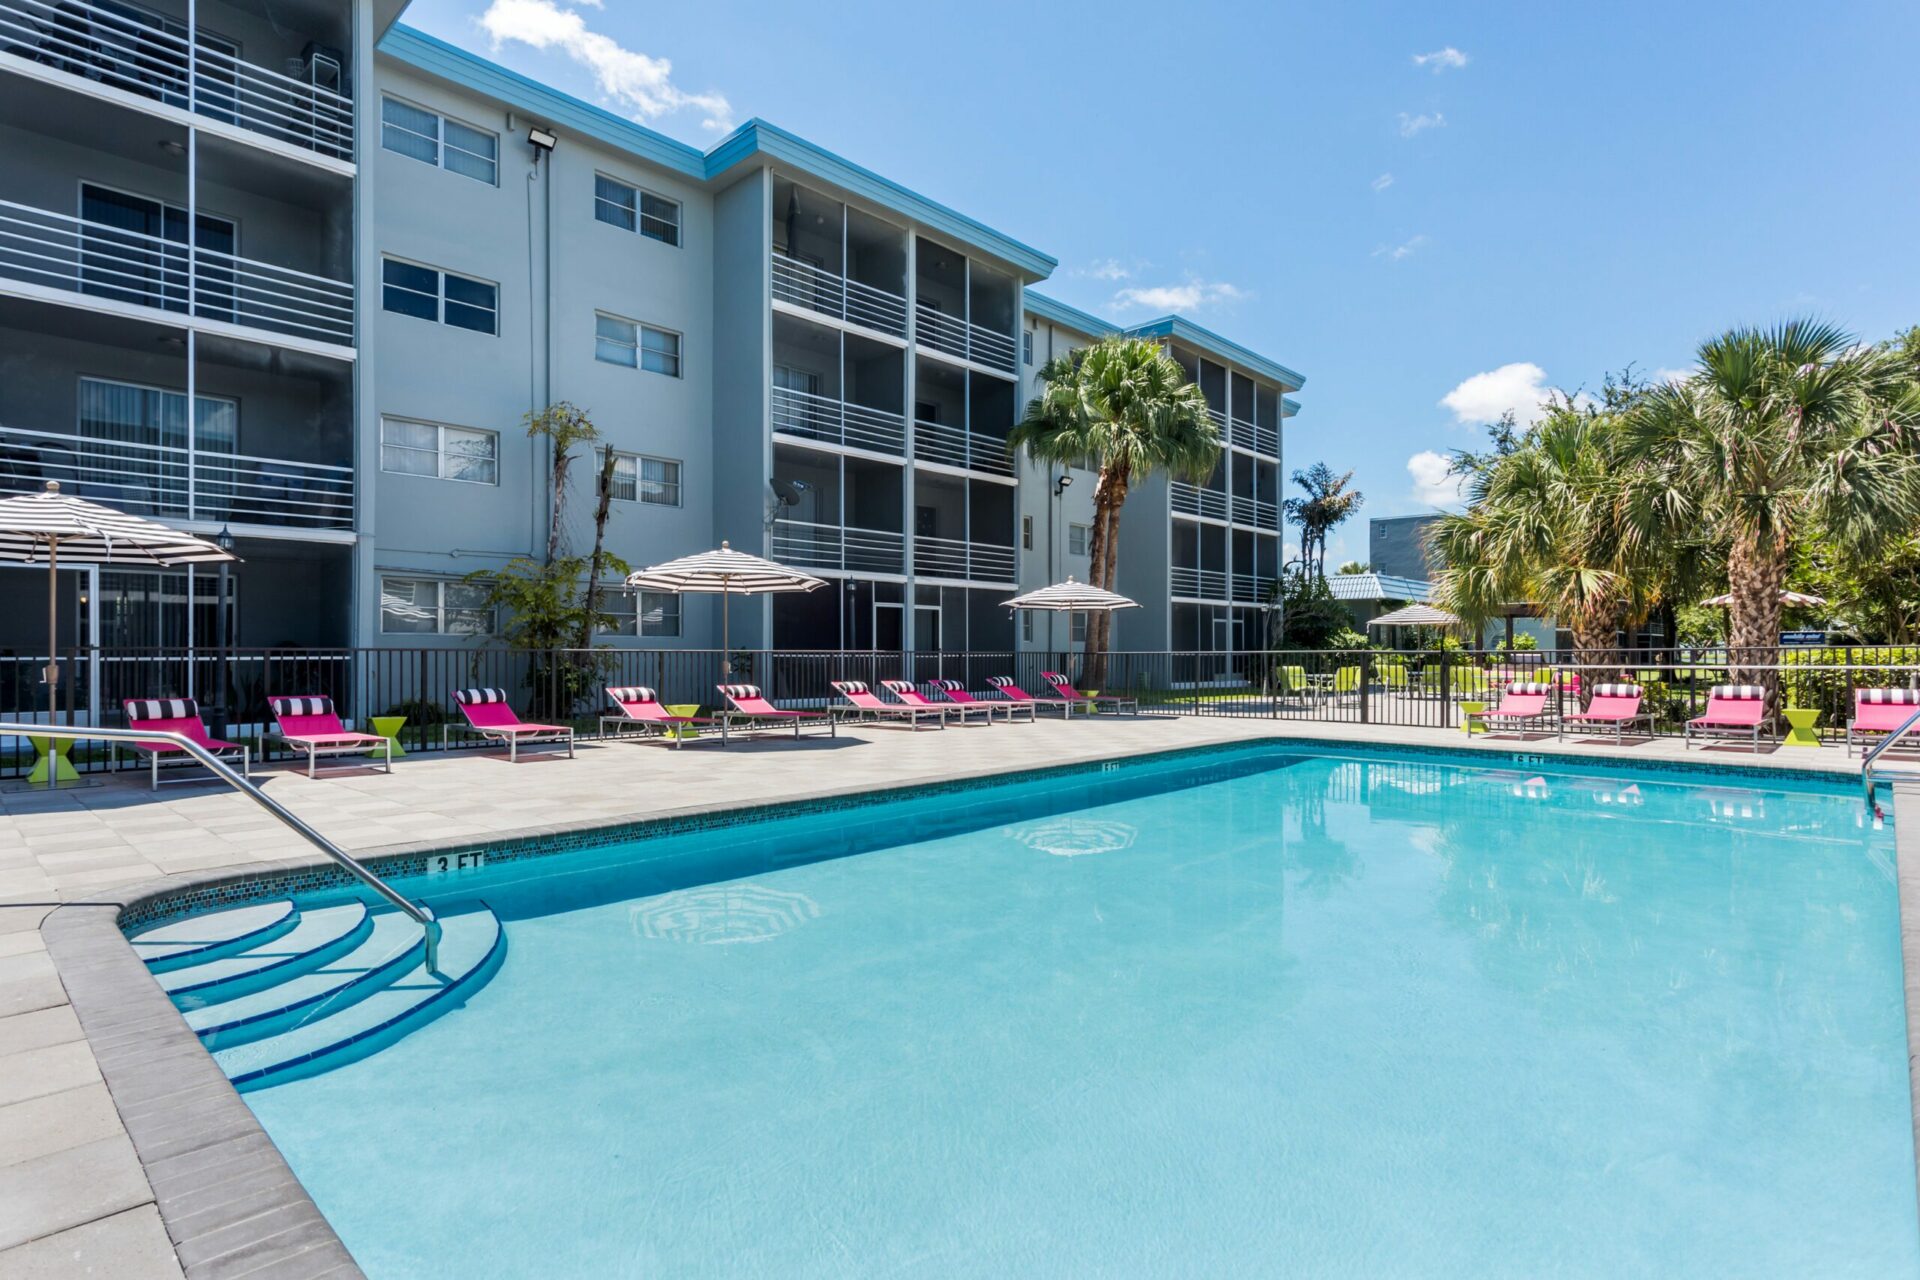 Large dazzling pool at Aventure Oaks Apartments